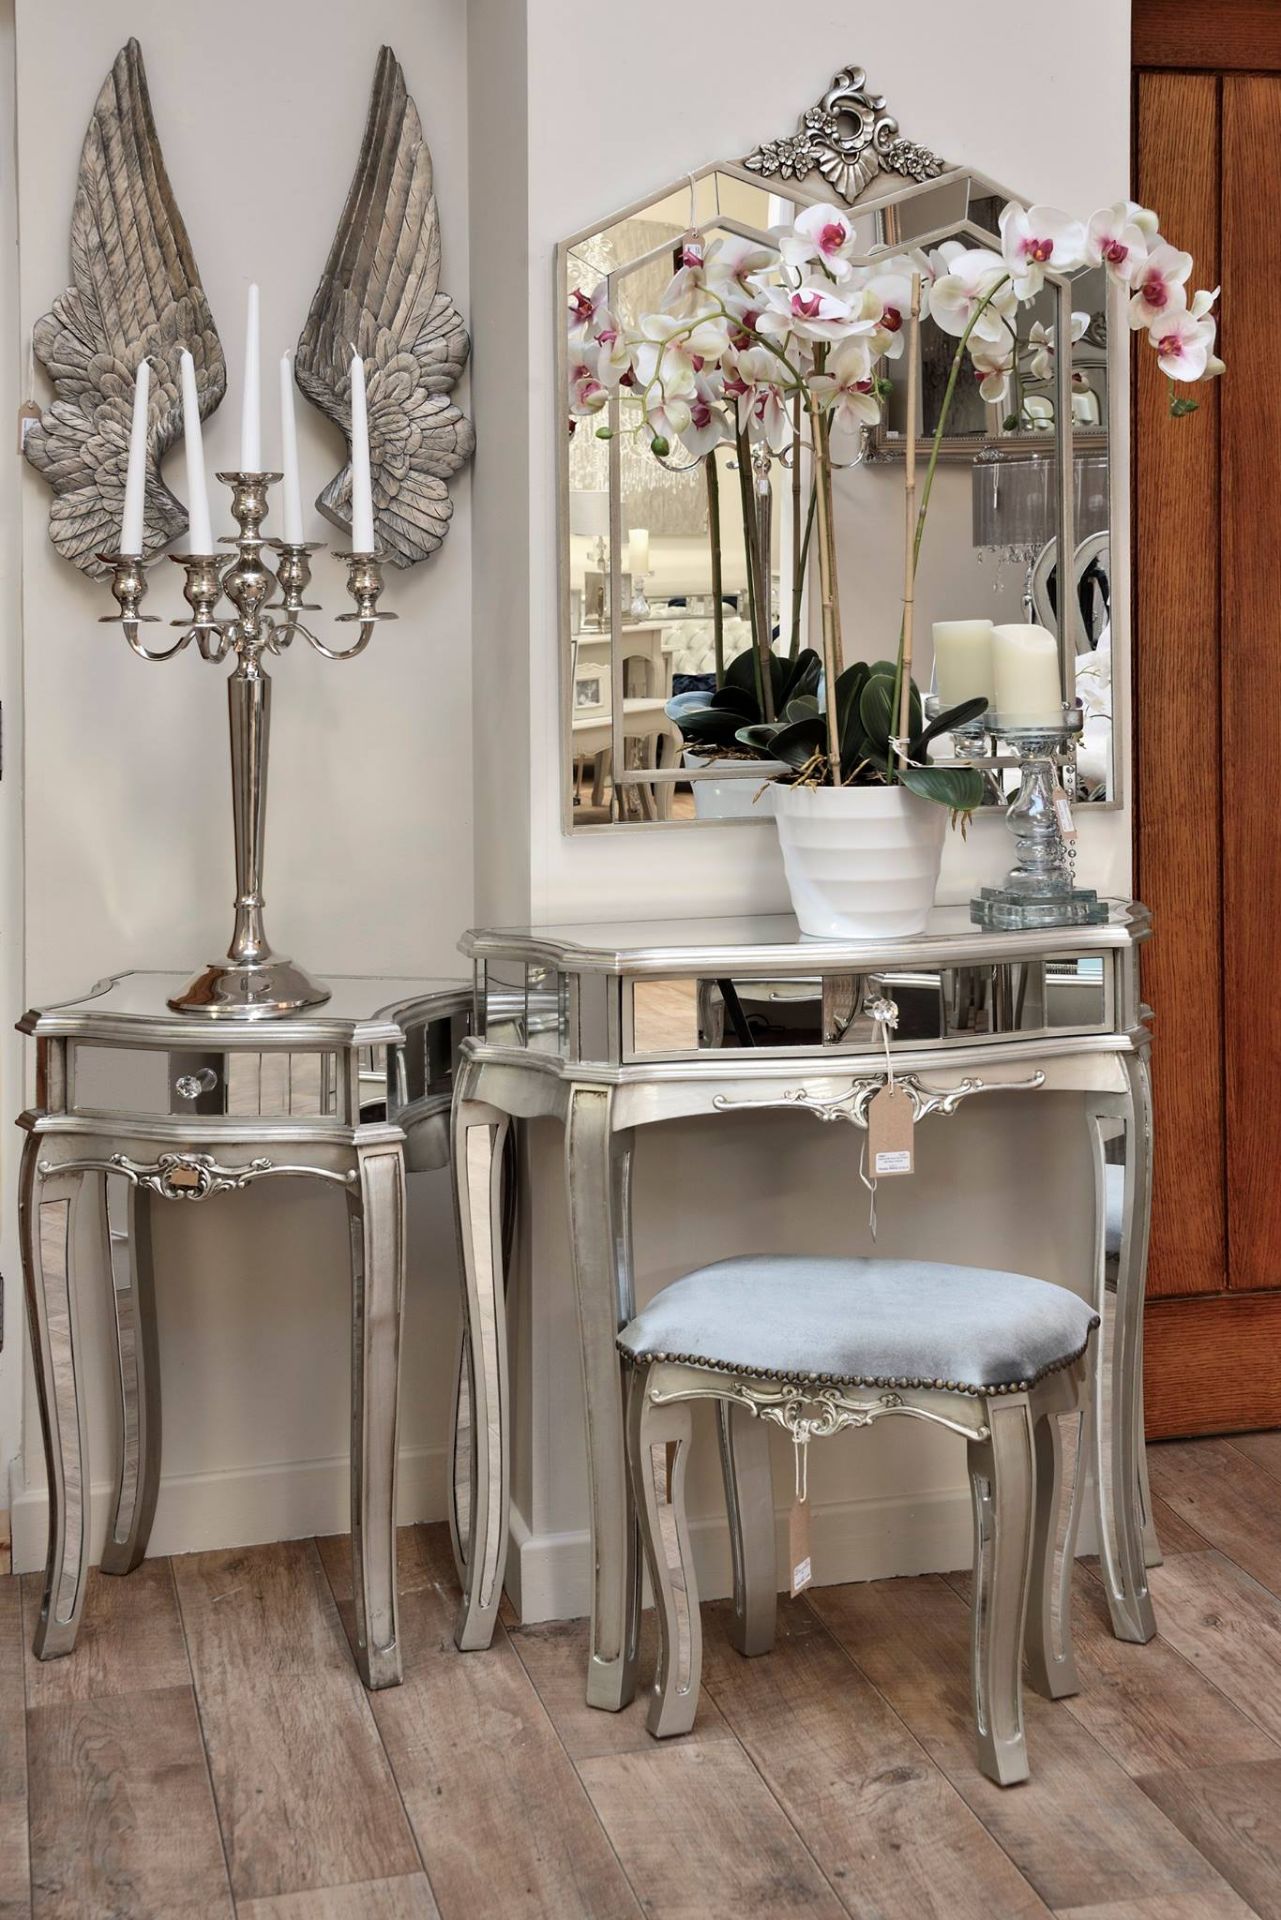 Alexandria Mirrored One Drawer Half Moon Console The Whole Of The Range Is Pretty Distinctive But